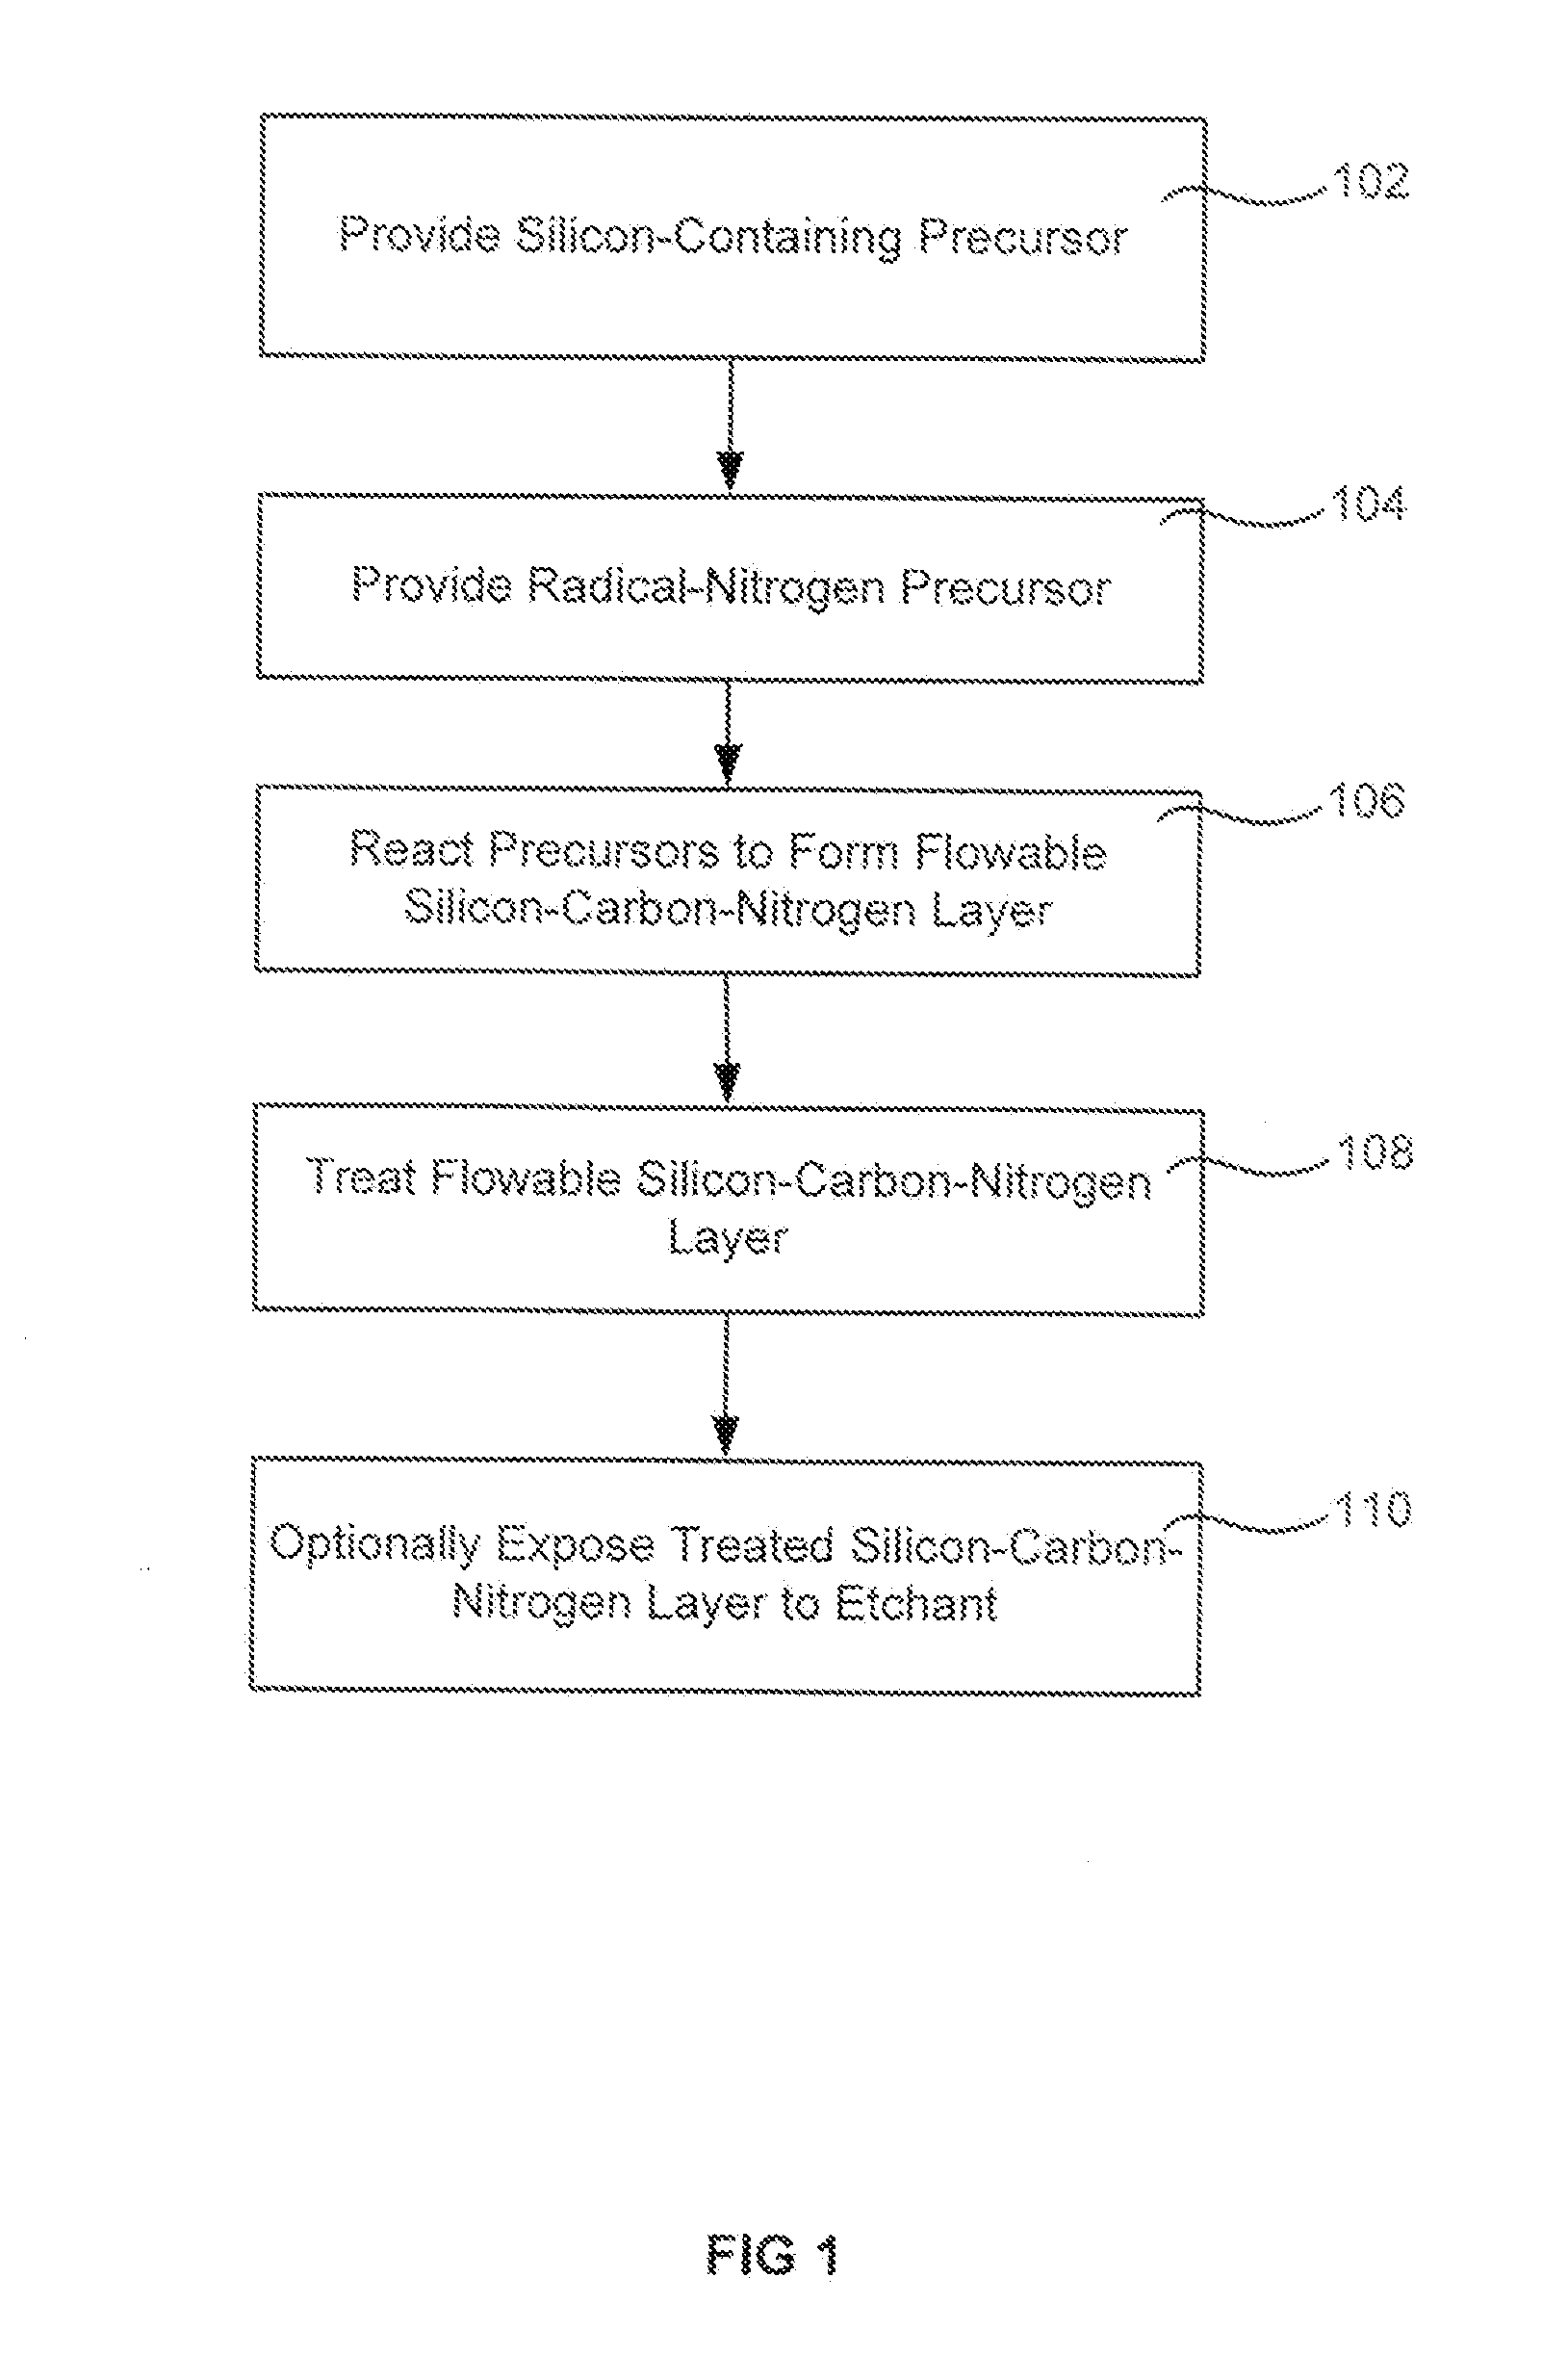 Flowable silicon-carbon-nitrogen layers for semiconductor processing